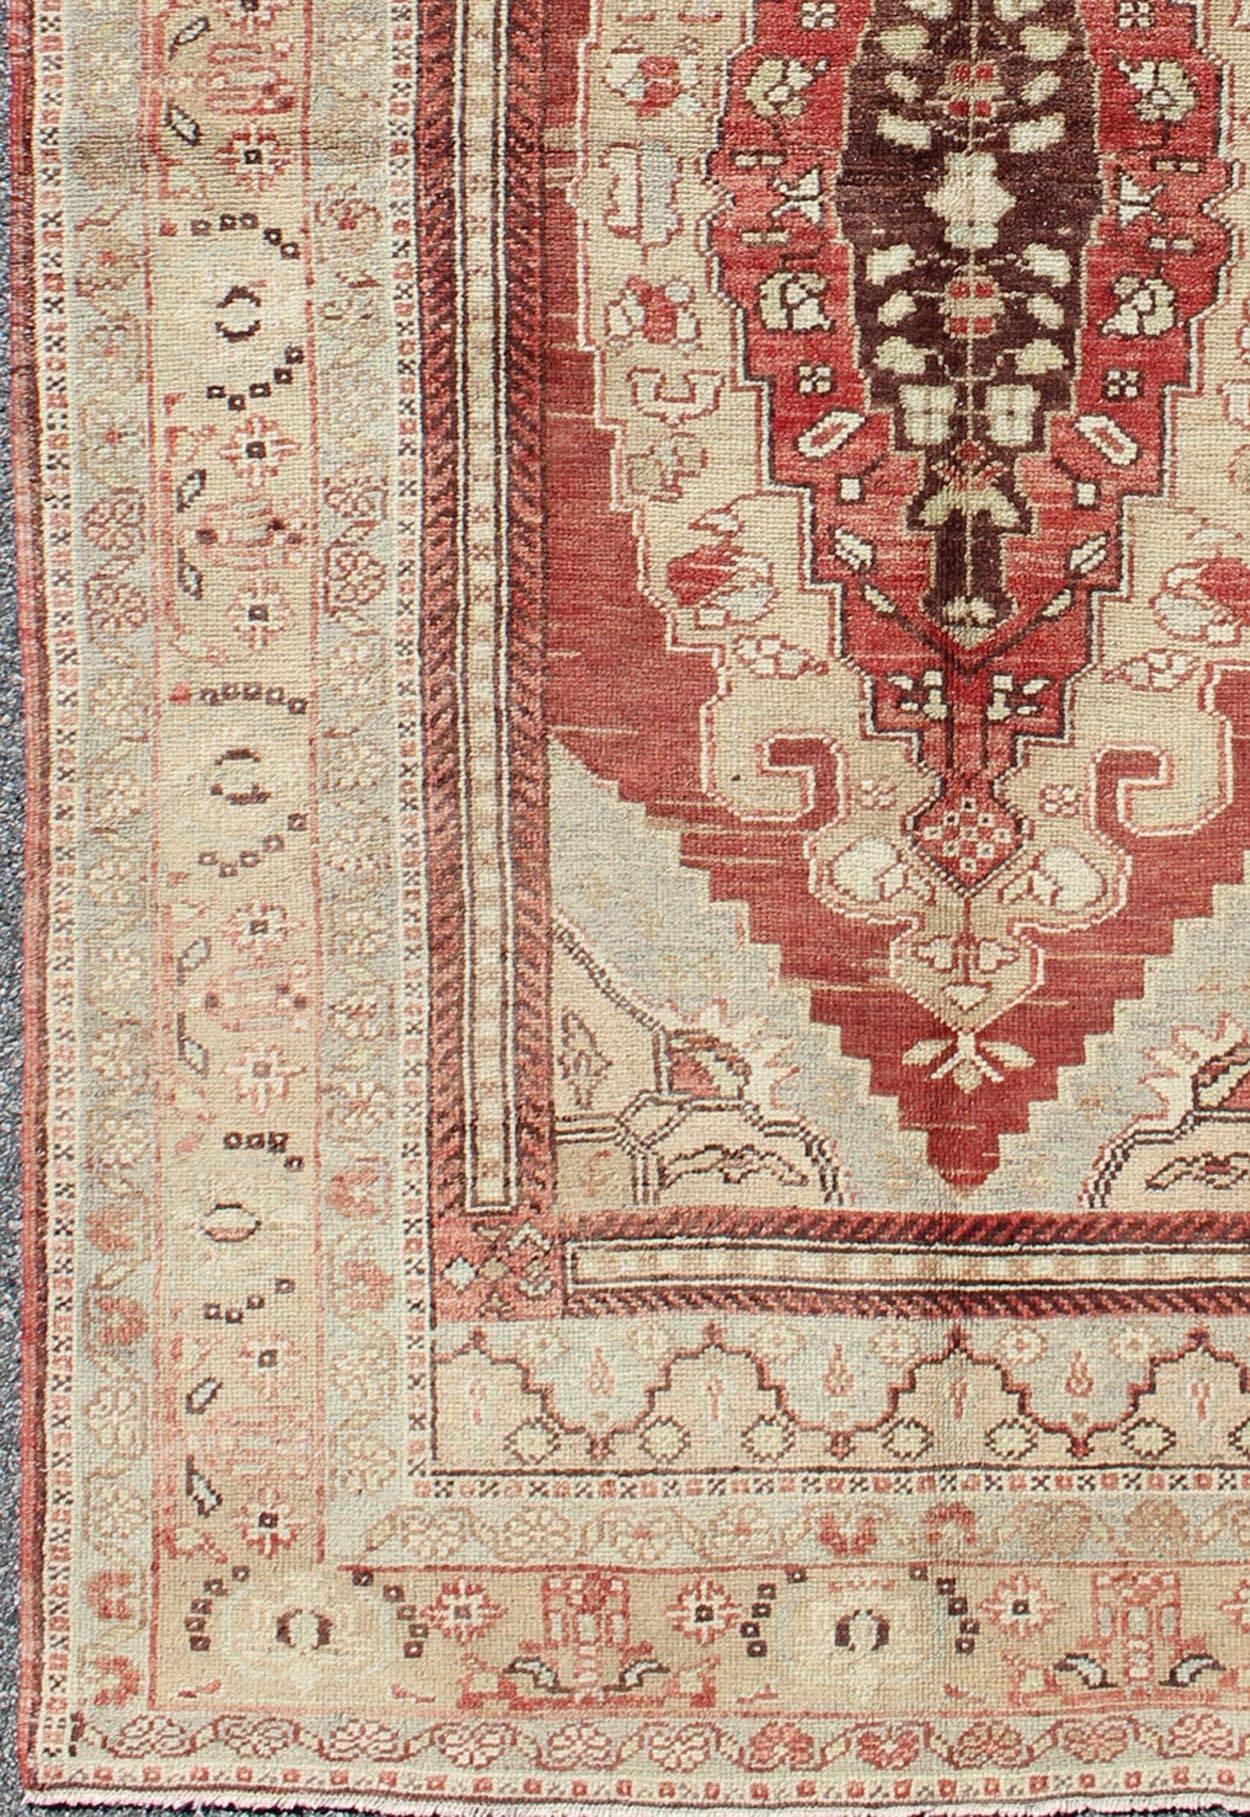 Keivan Woven Arts, En-123907, 1930's antique Turkish Oushak rug. Antique Turkish Oushak rug with red and neutral colors.

Set on red color background, this stunning Oushak displays a wide border with an array of warm tones.

Measures: 4'9 x